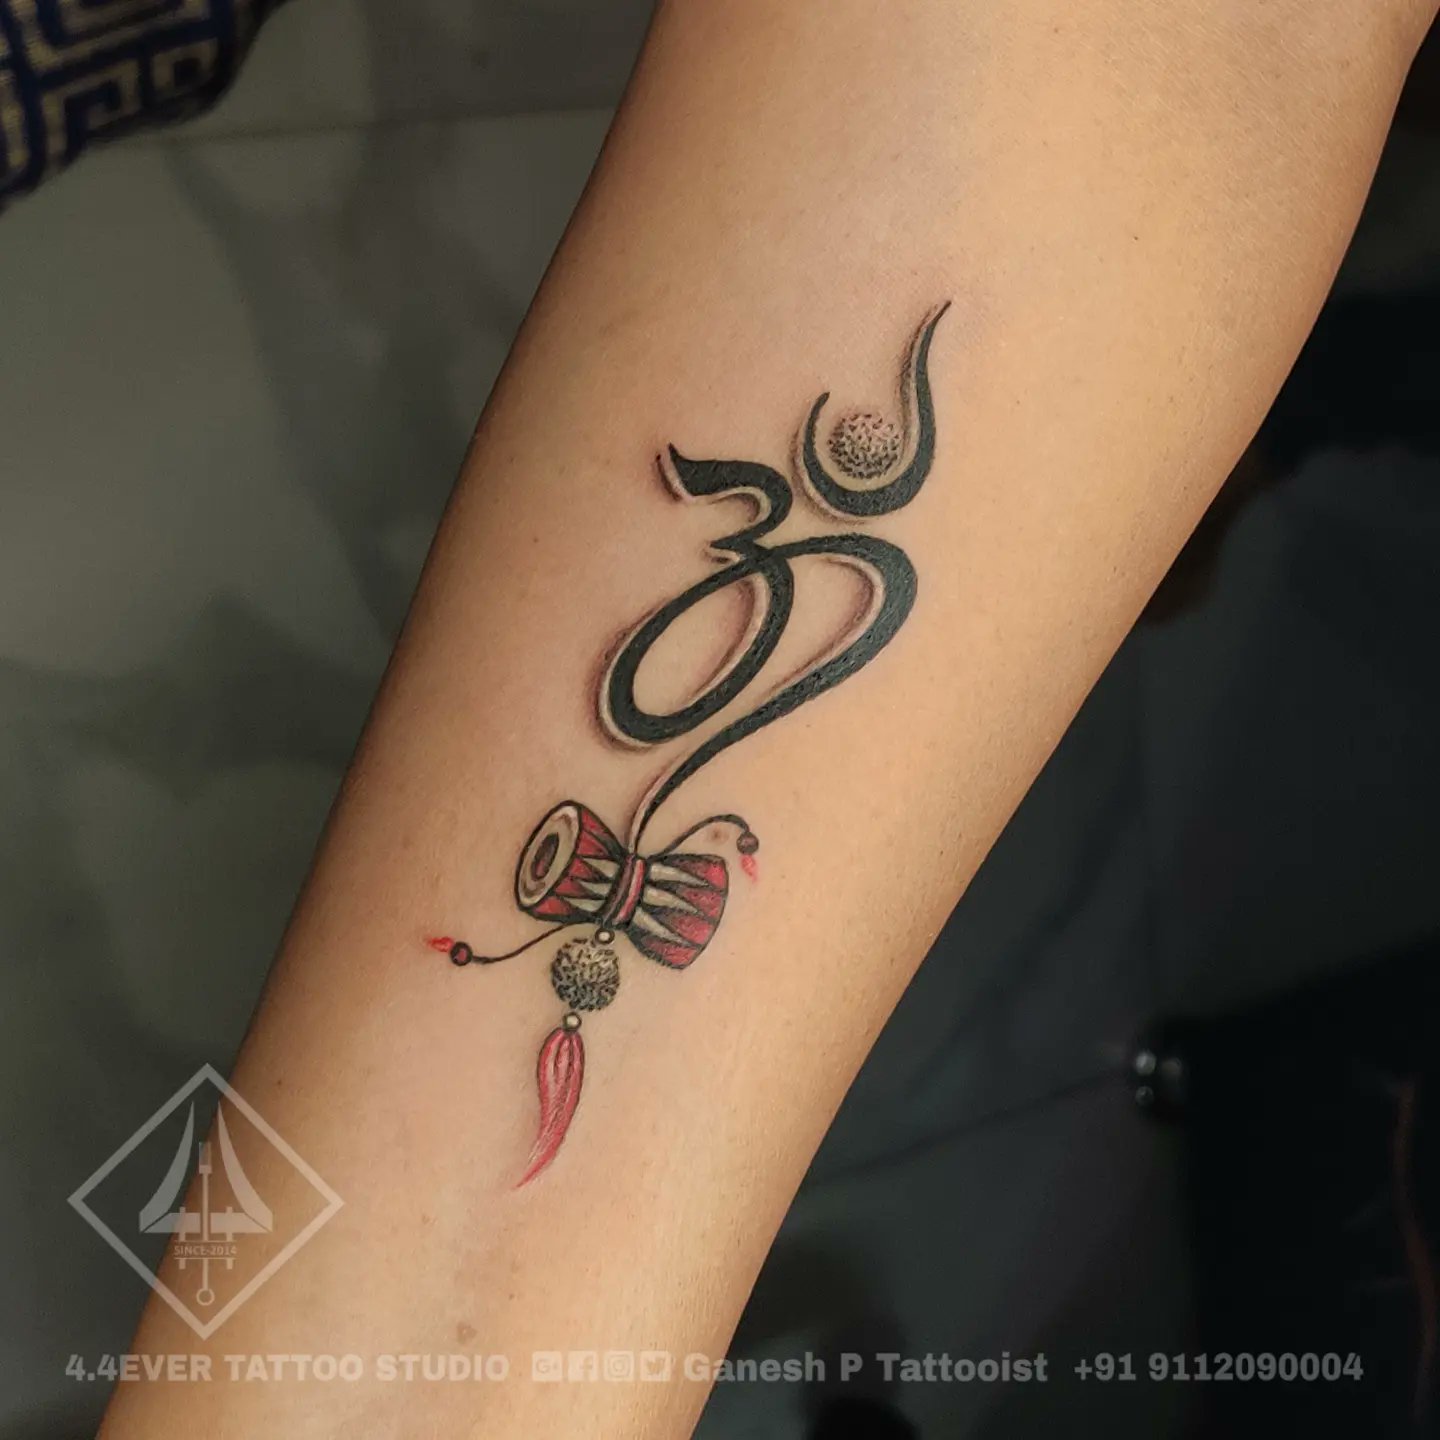 Share 92 about love p tattoo best  indaotaonec